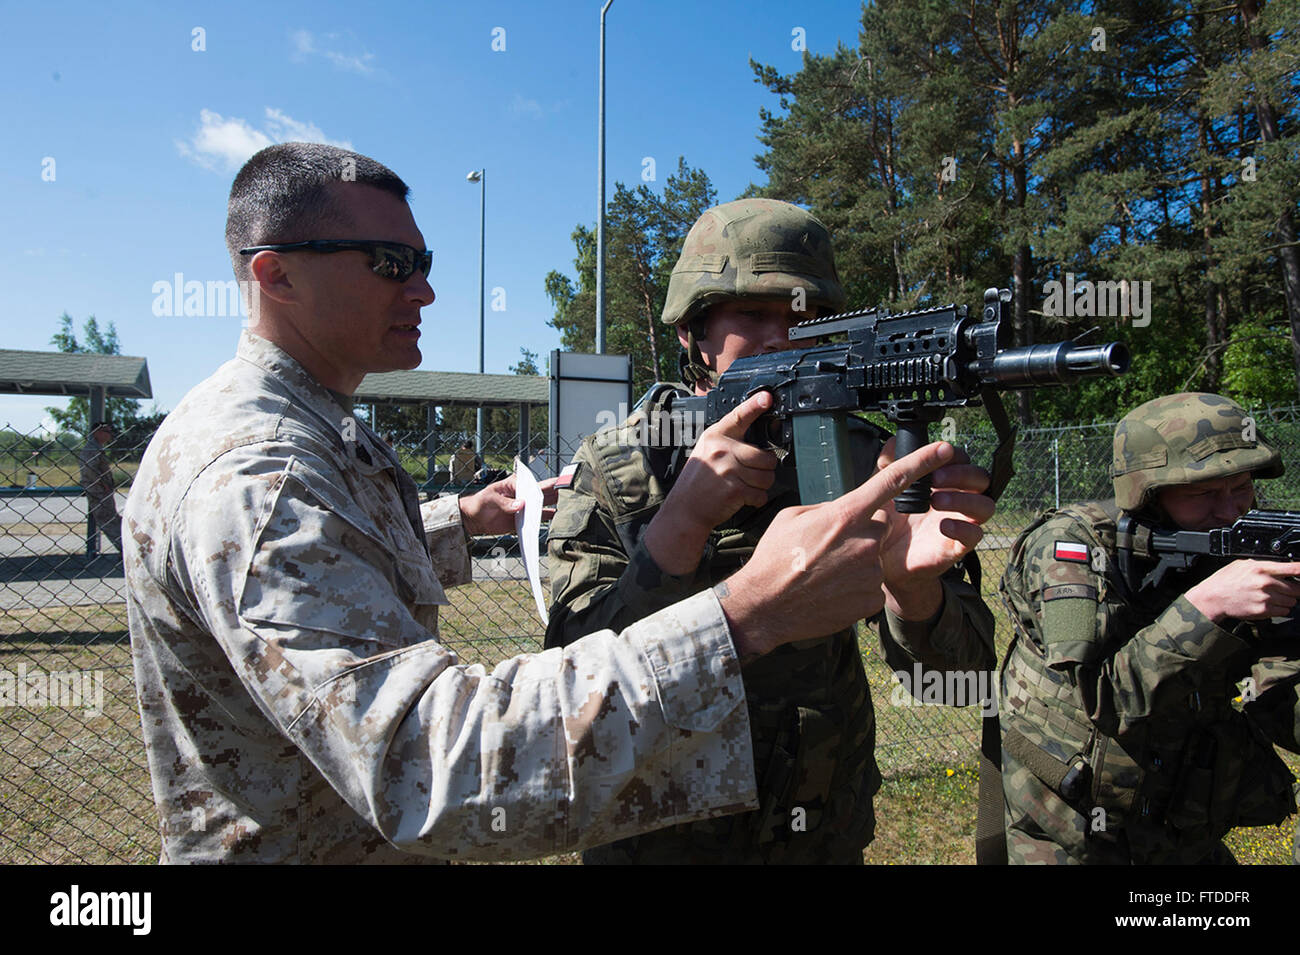 150611-N-AZ513-024 USTKA, Poland (June 11, 2015) U.S. Marine Sgt. Brett Sayre, assigned to Fleet Anti-terrorism Security Team Europe, (left) teaches to infantry men of Poland’s 1st Mechanized Battalion, how to properly fire from a combat stance during exercise Baltic Operations (BALTOPS) 2015. BALTOPS is an annual multinational exercise designed to enhance flexibility and interoperability, as well as demonstrate resolve among allied and partner forces to defend the Baltic region. (US Navy photo by Mass Communication Specialist 2nd Class John Callahan/Released) Stock Photo